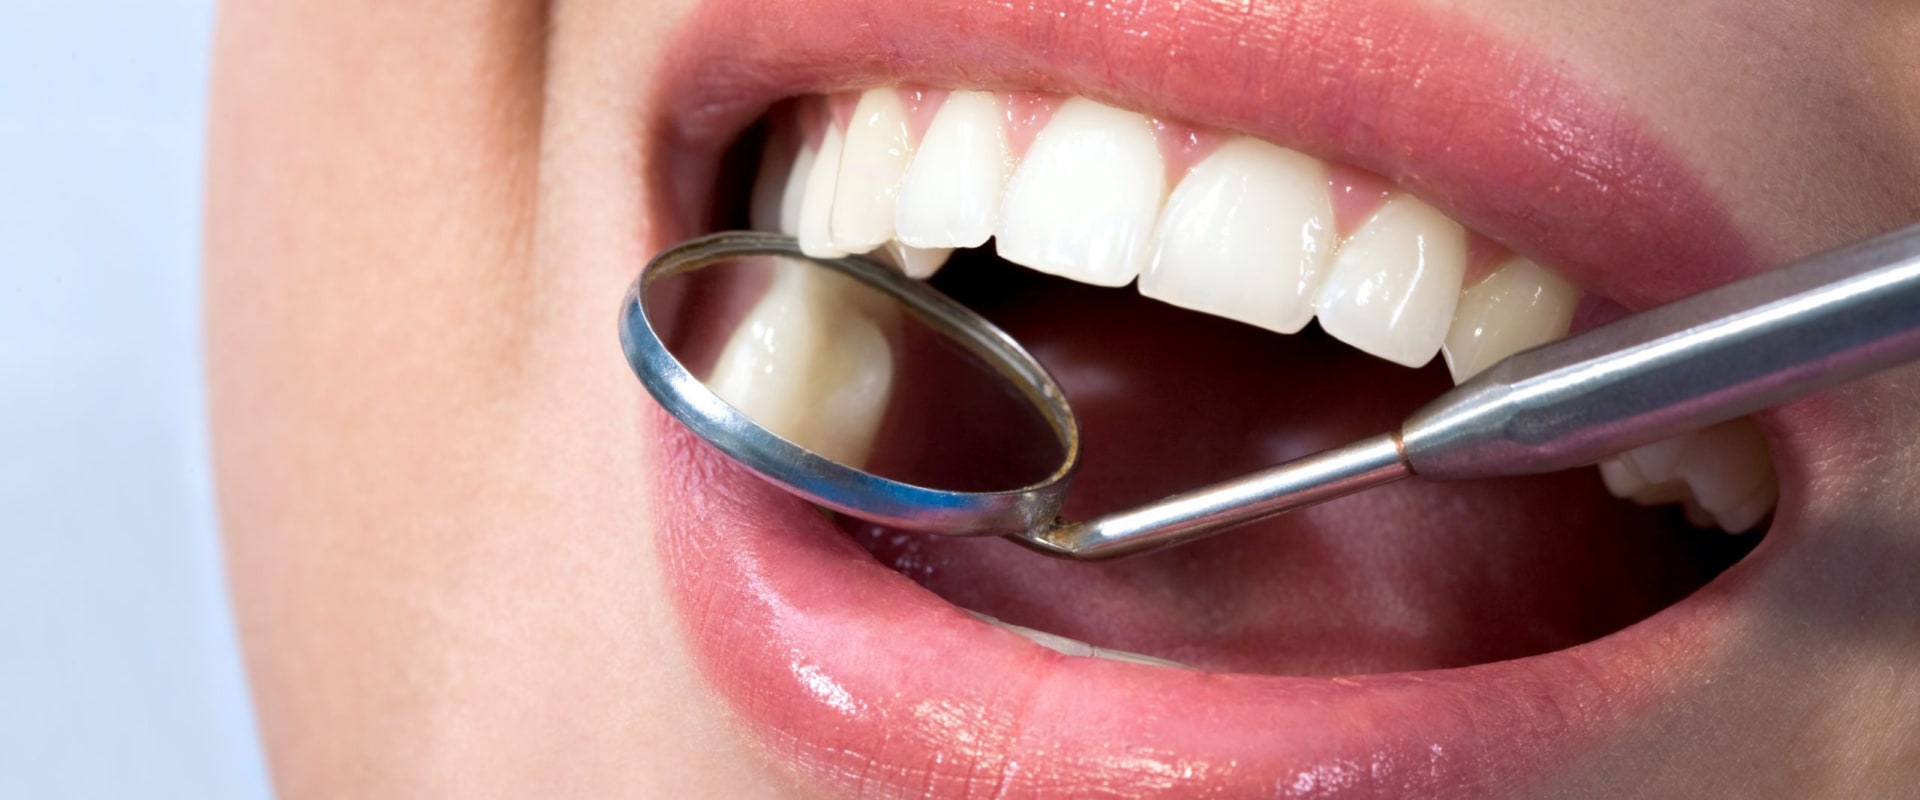 Do Orthodontists Offer Payment Plans for Orthodontic Treatment?